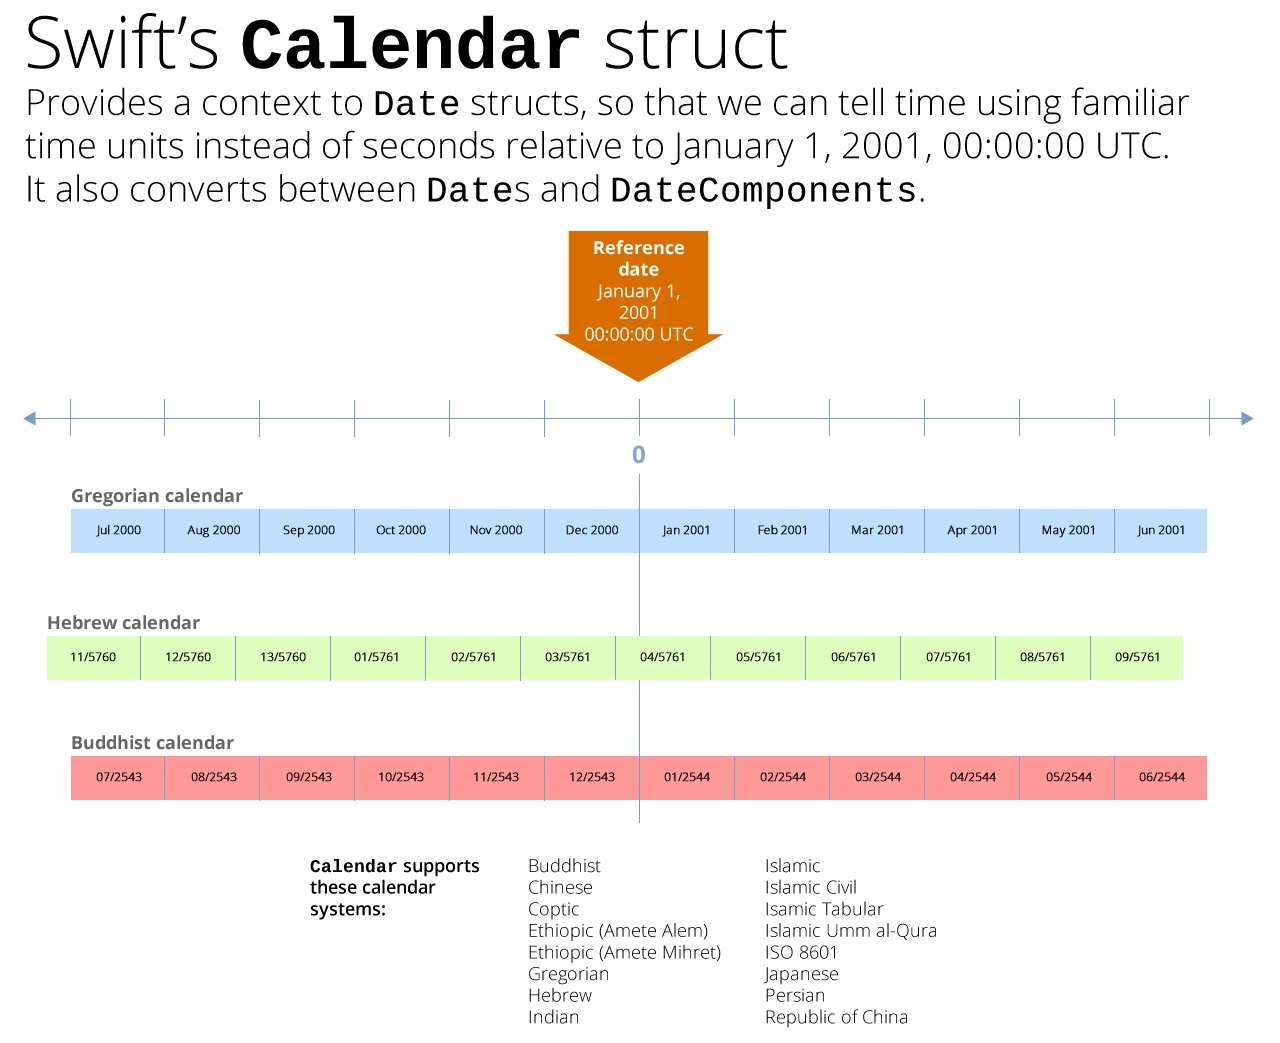 How To Work With Dates And Times In Swift 3, Part 1: Dates